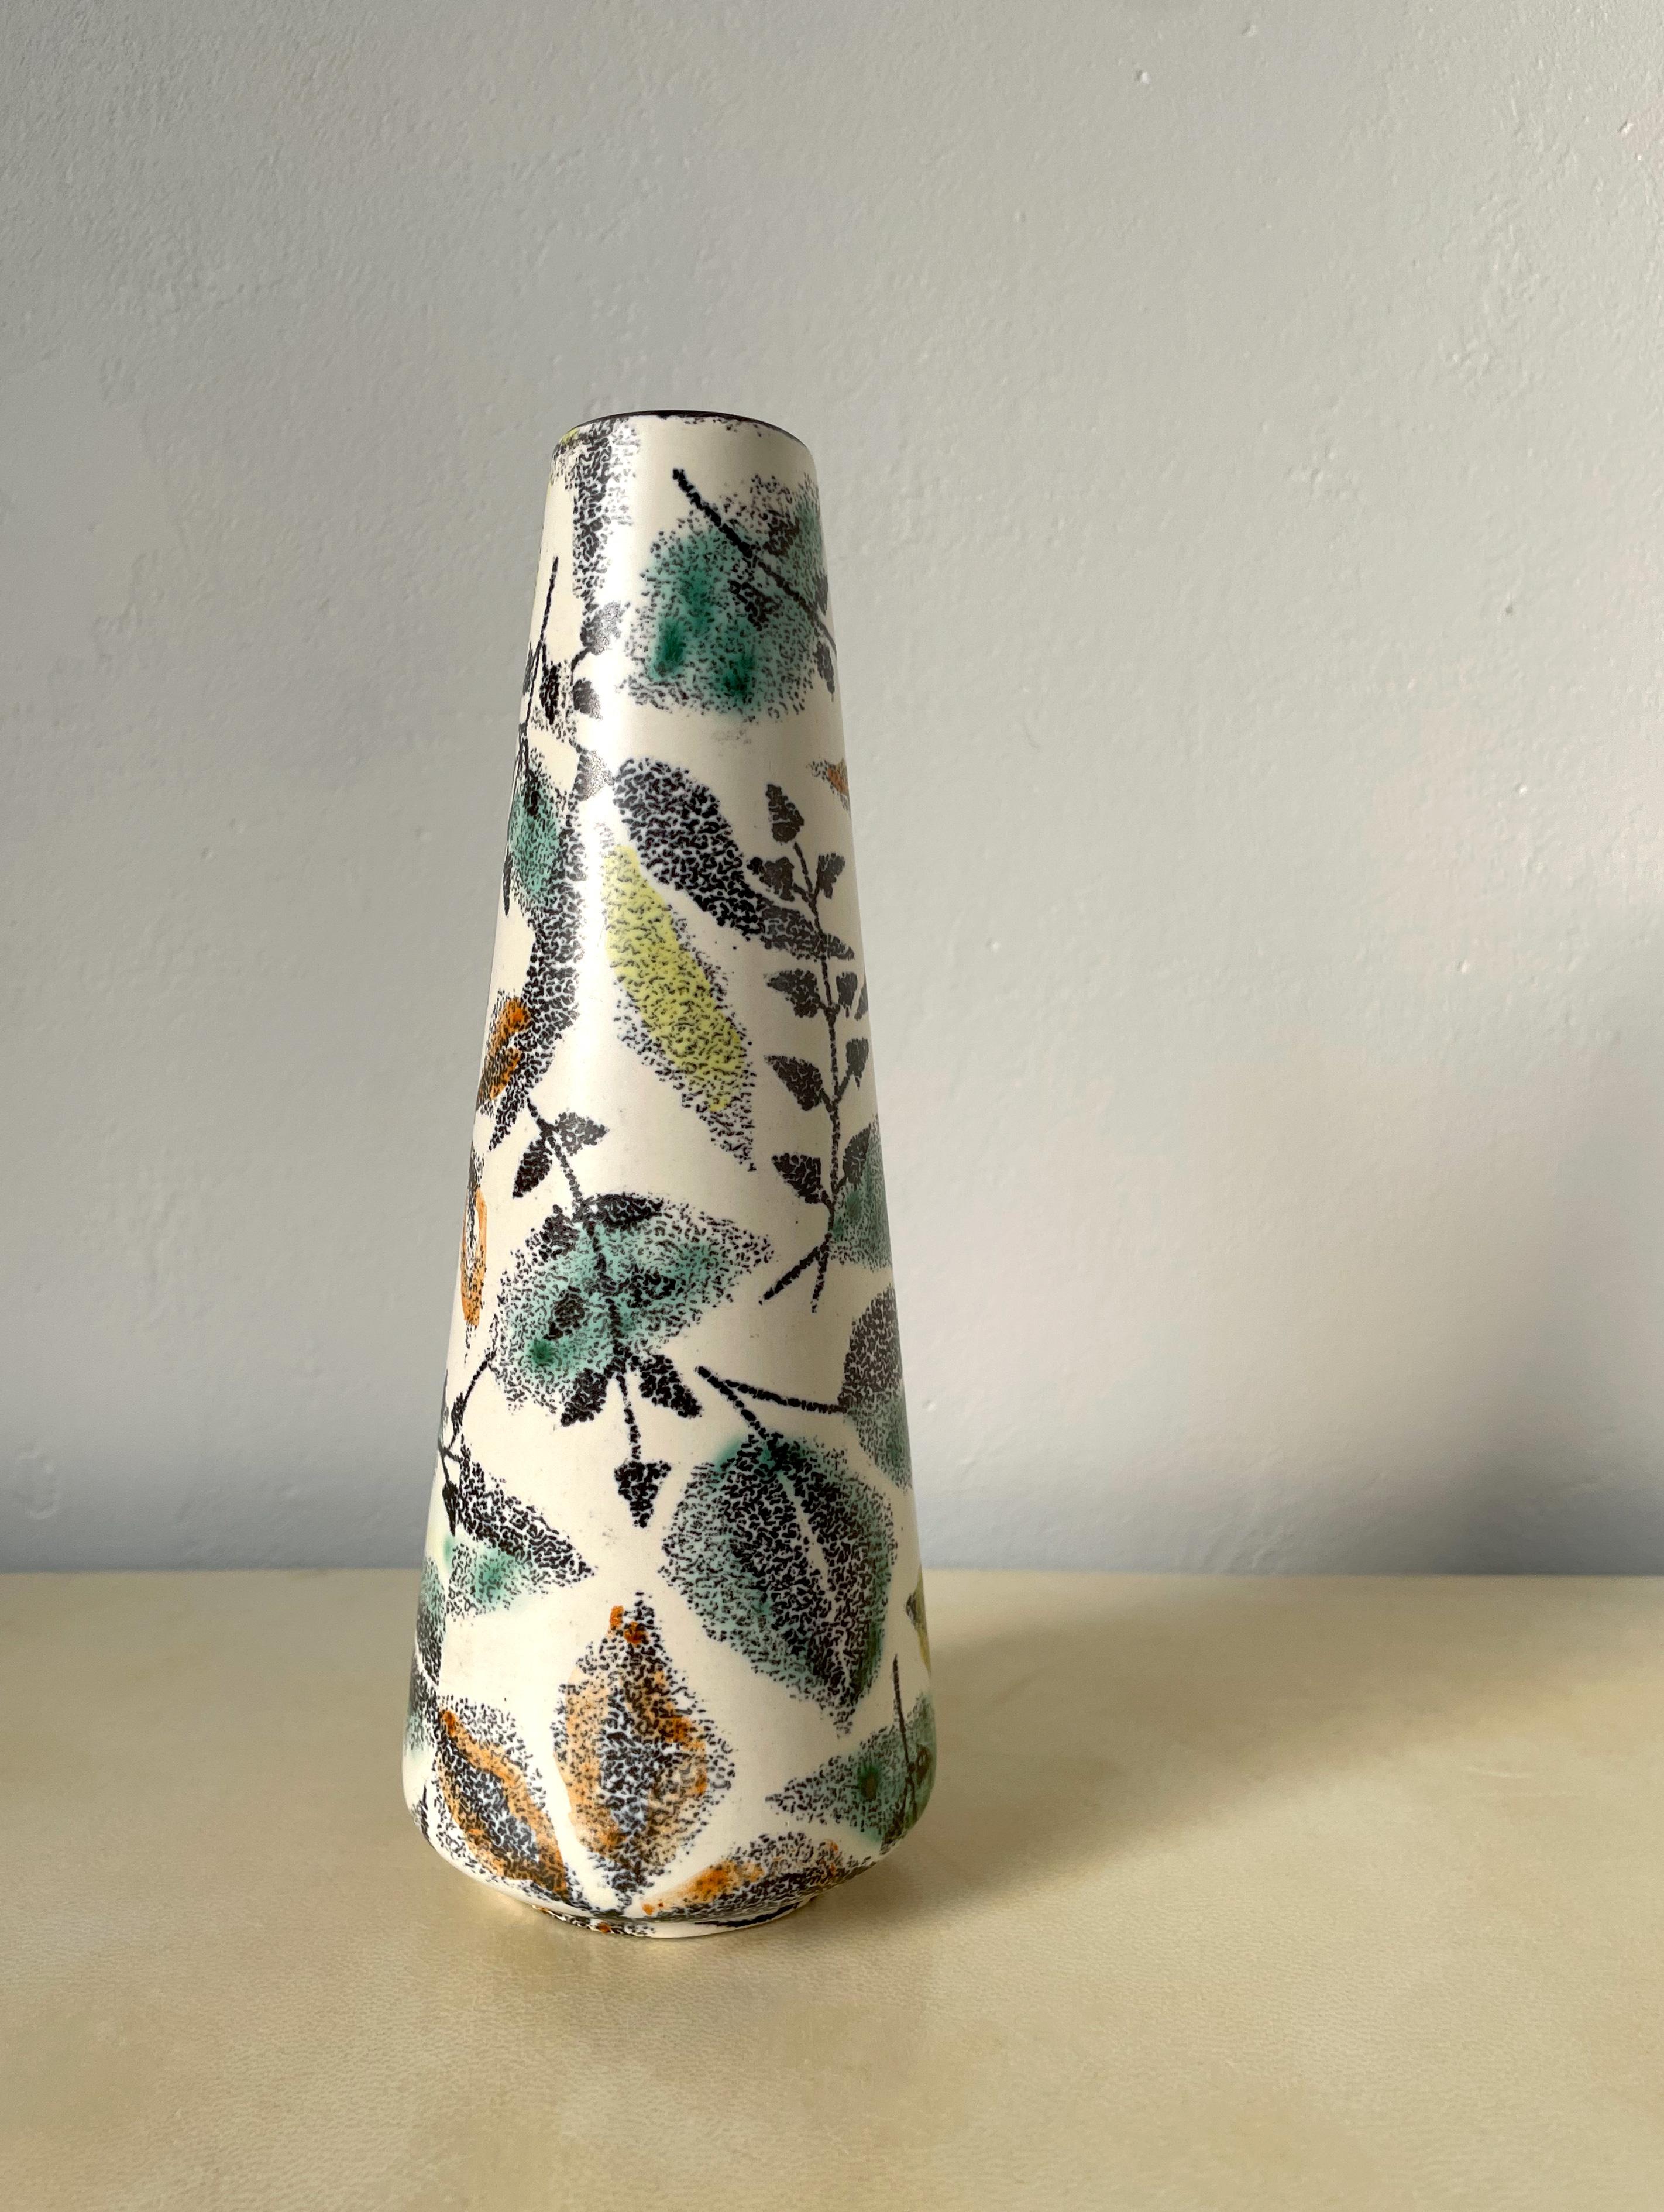 Midcentury modern vase with graphic dotted, organic, floral decor on white base. Decorative leaves in green, yellow, red colors. Manufactured in the late 1960s. Stamped under base. Beautiful vintage condition.